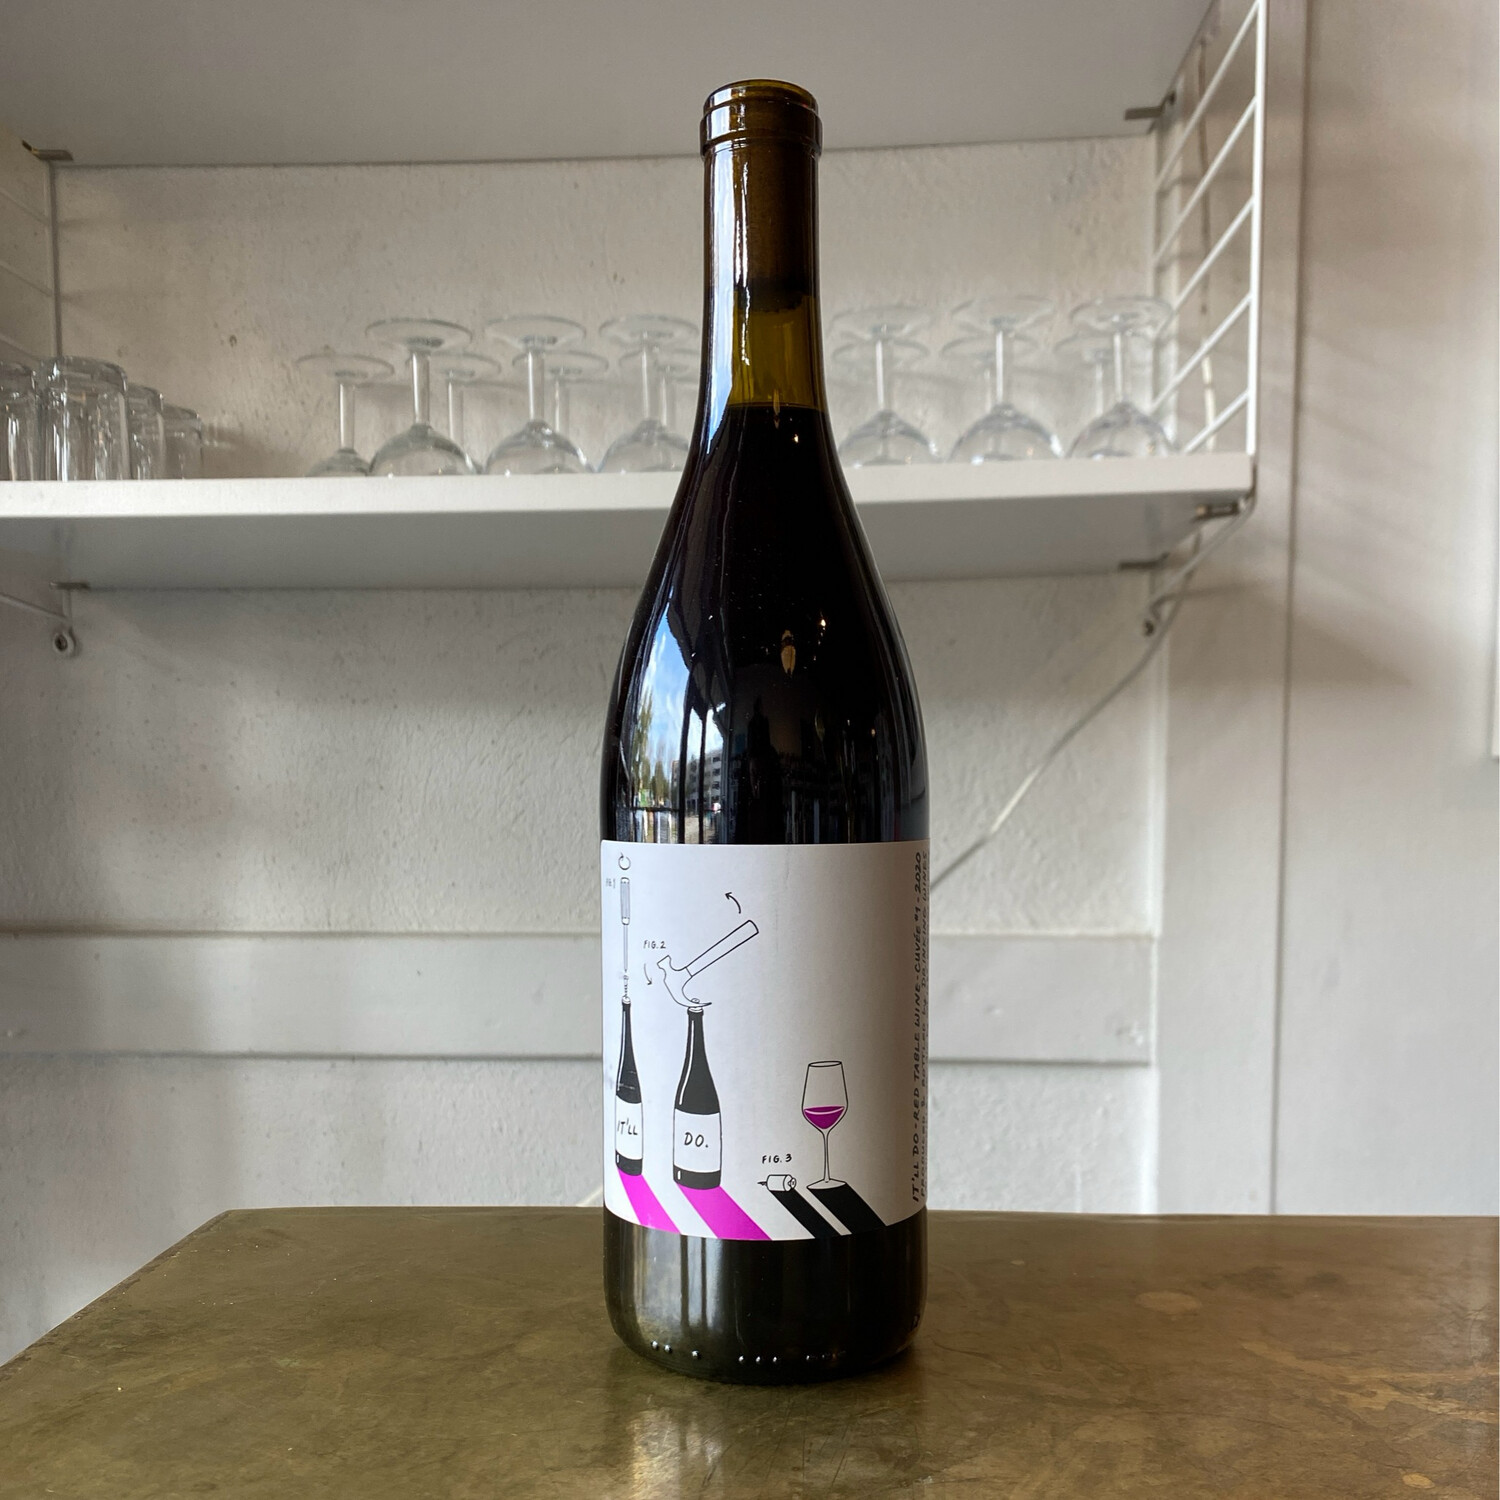 The Marigny 'It'll Do' Red Wine #1 (2020)